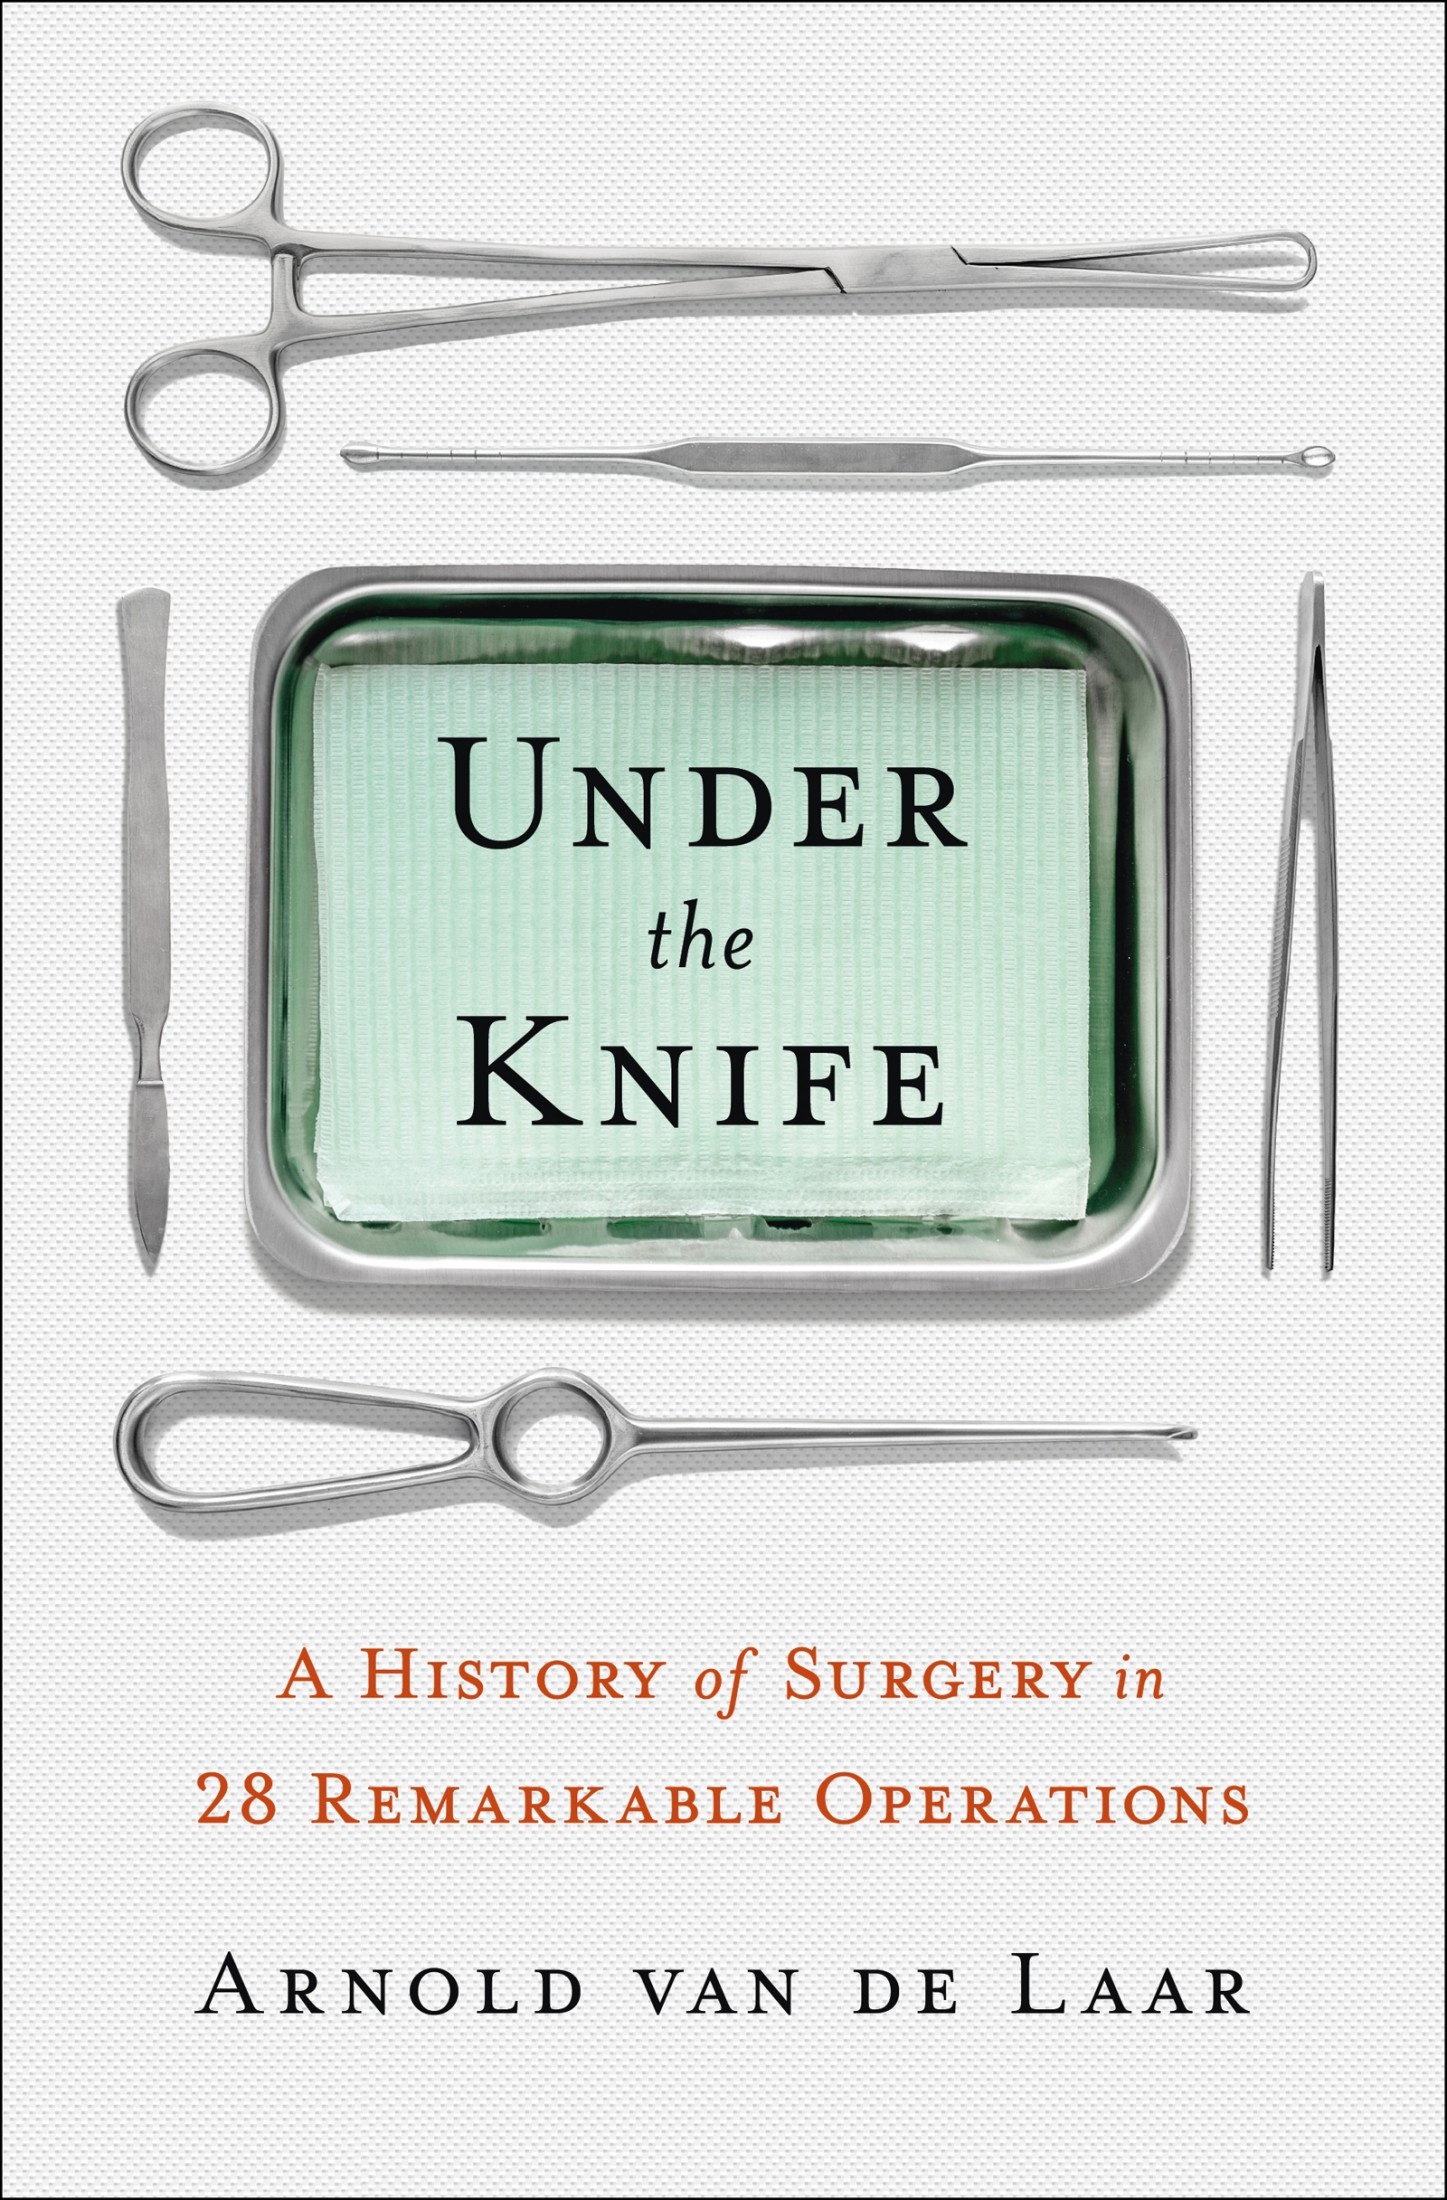 Under the Knife: A History of Surgery in 28 Remarkable Operations PDF